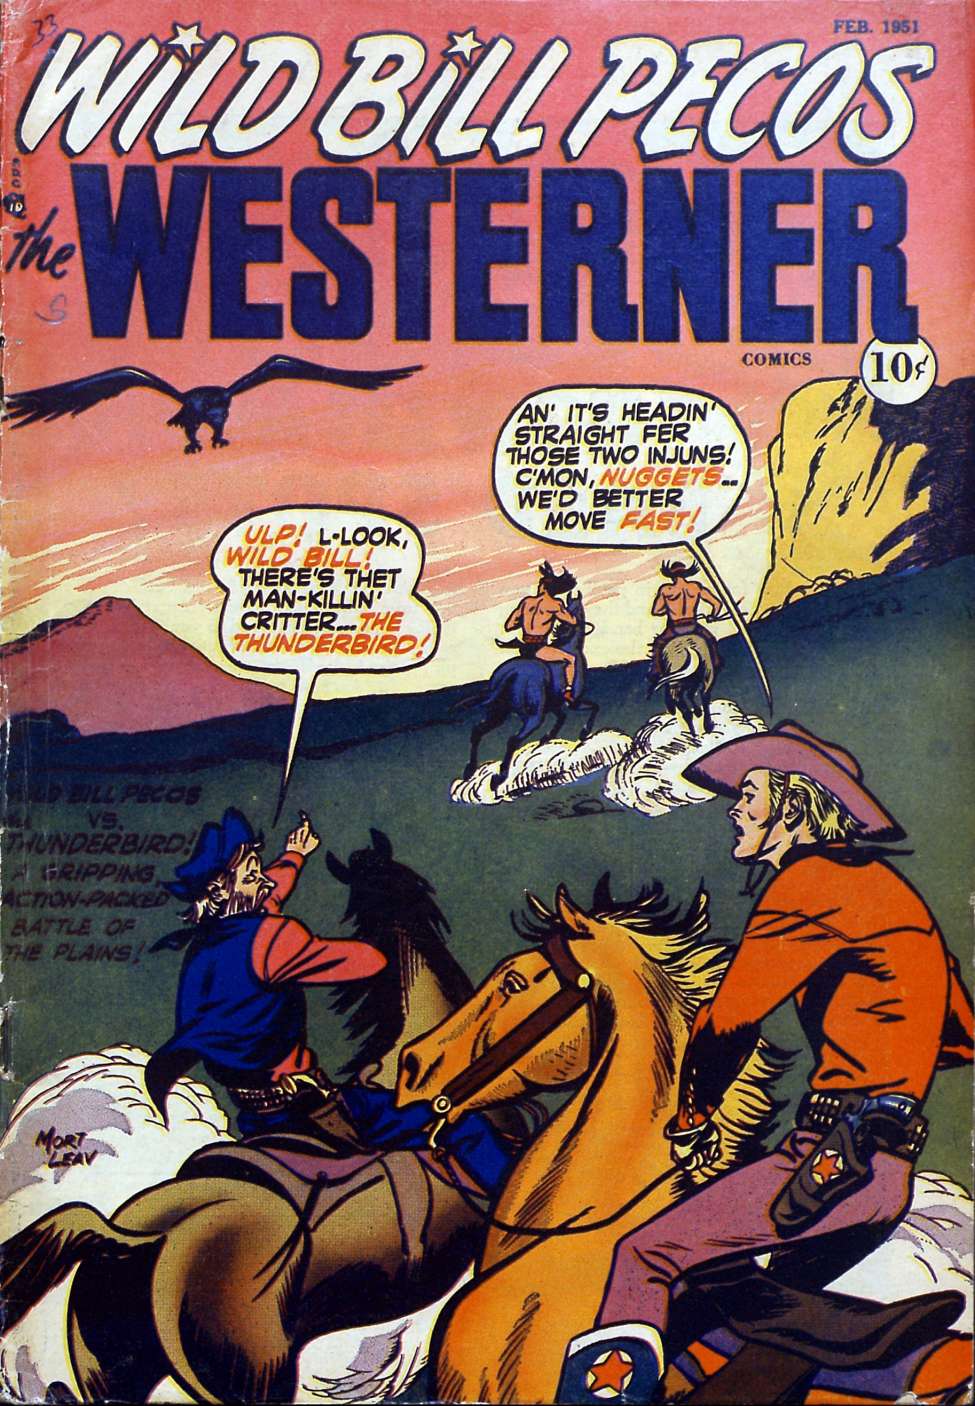 Comic Book Cover For The Westerner 33 (alt) - Version 2